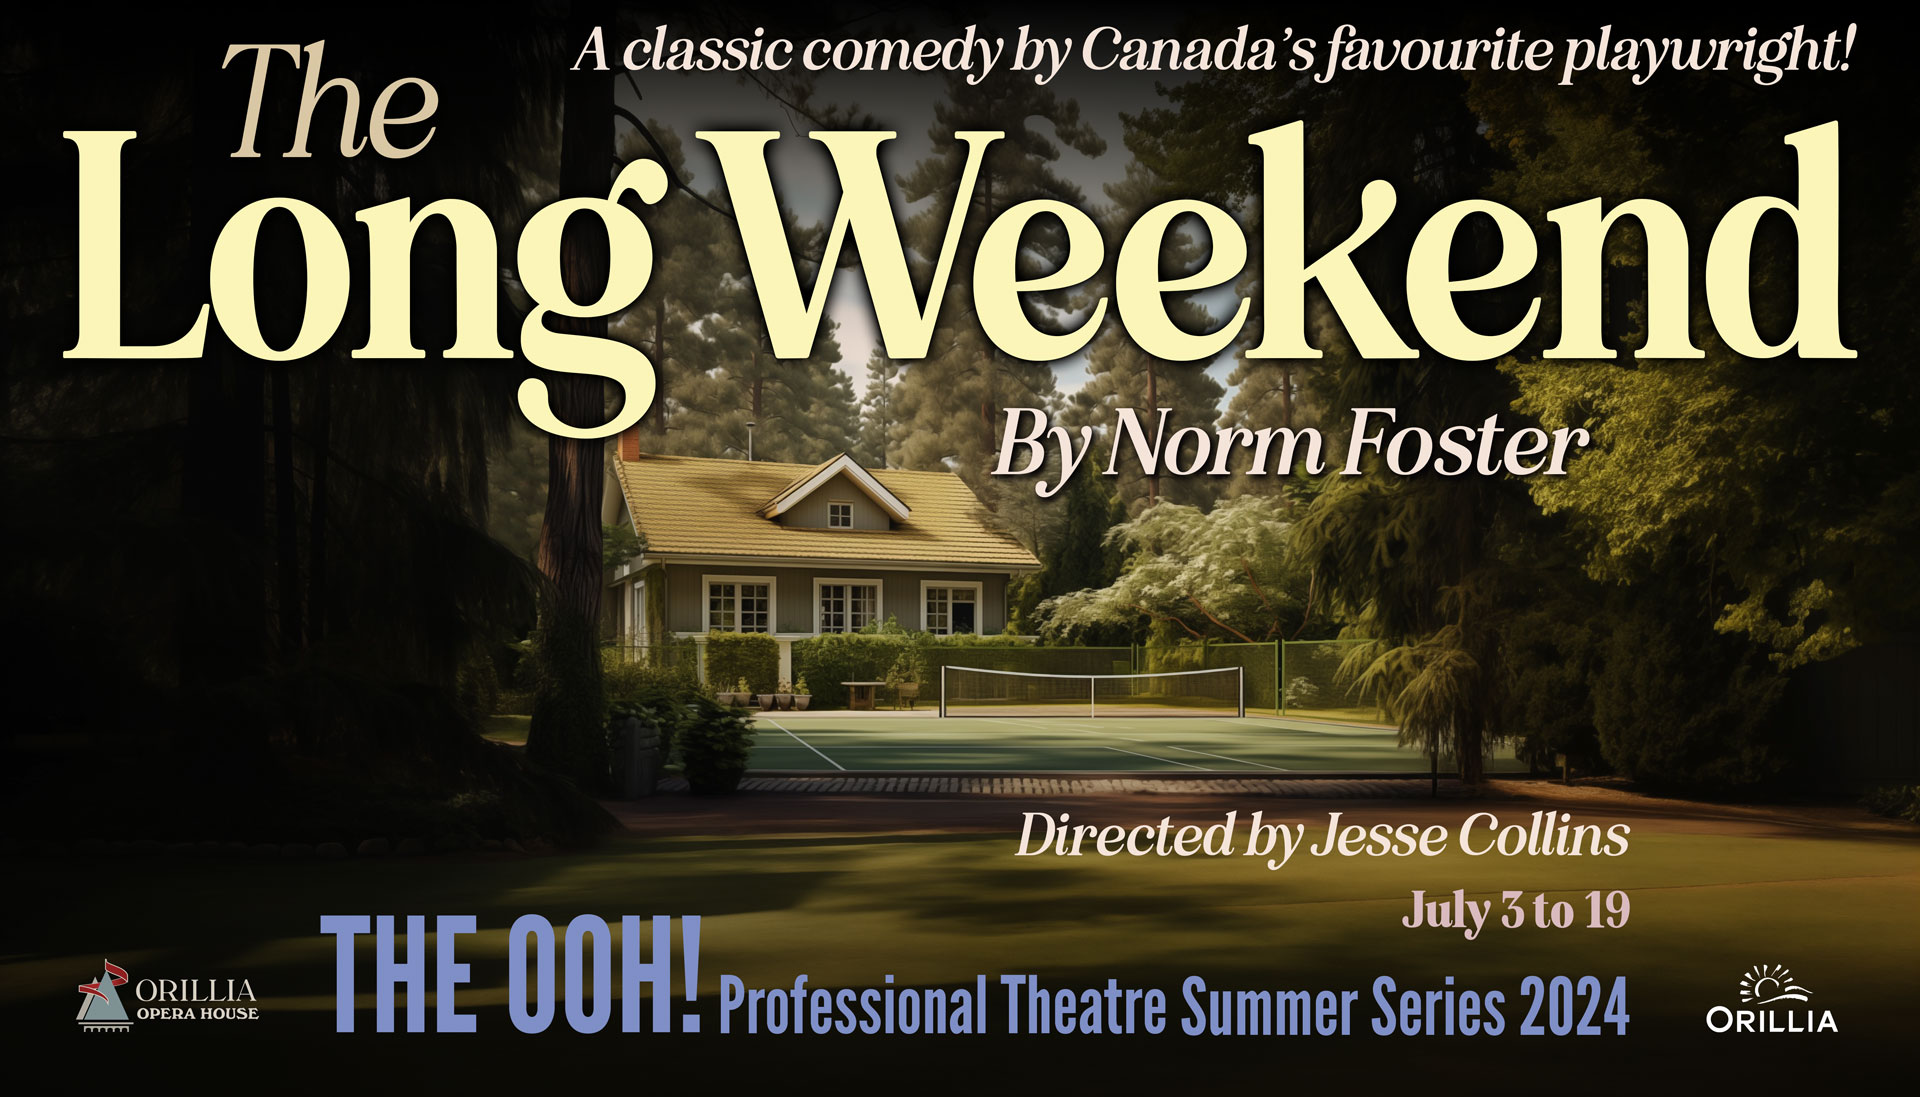 The Long Weekend at Orillia Opera House